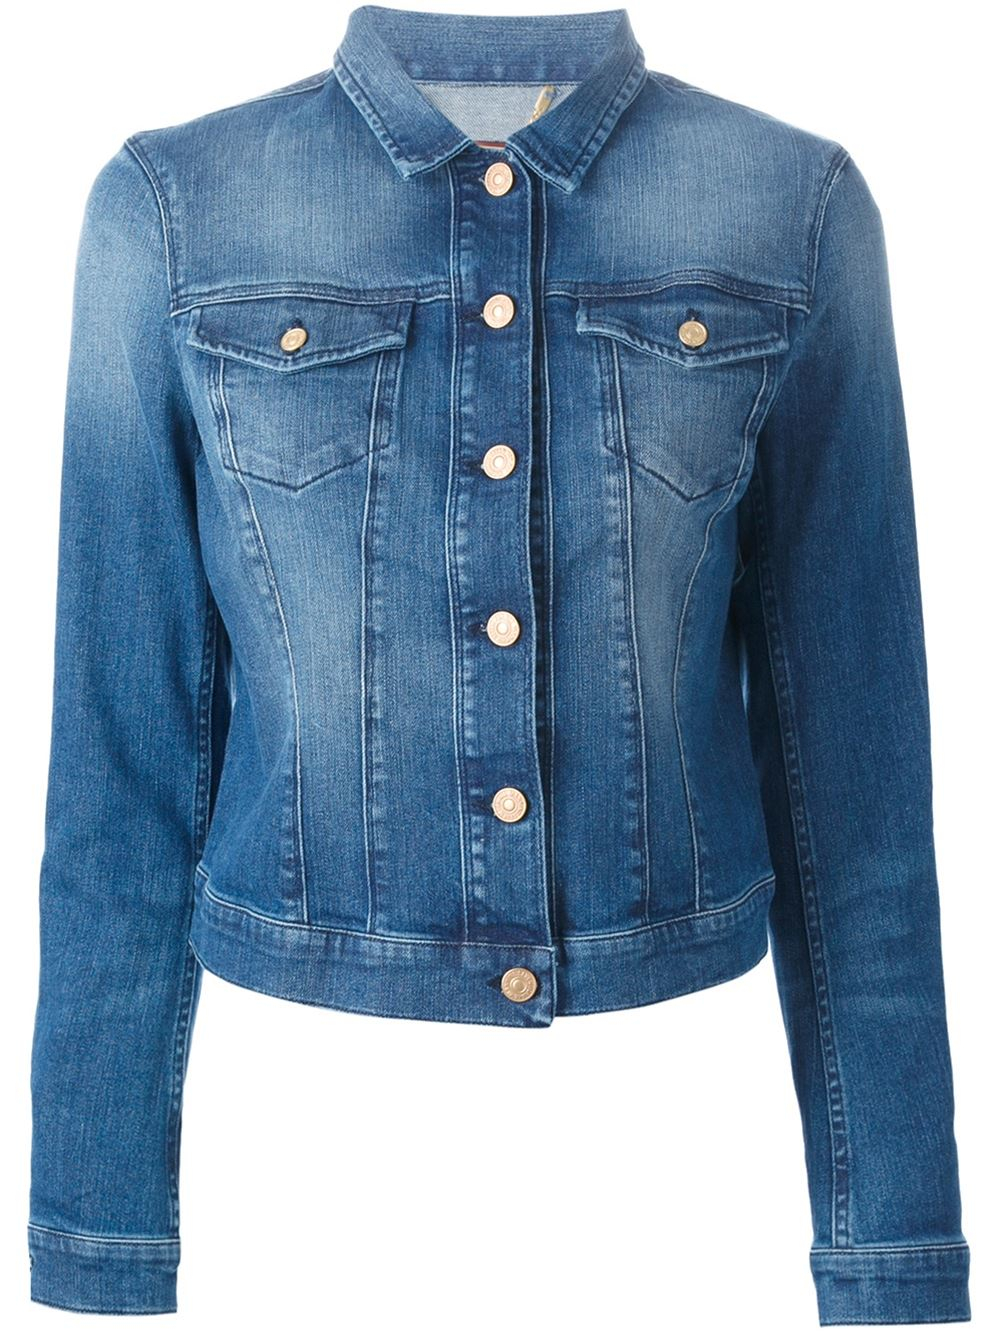 Lyst - 7 For All Mankind Cropped Denim Jacket in Blue